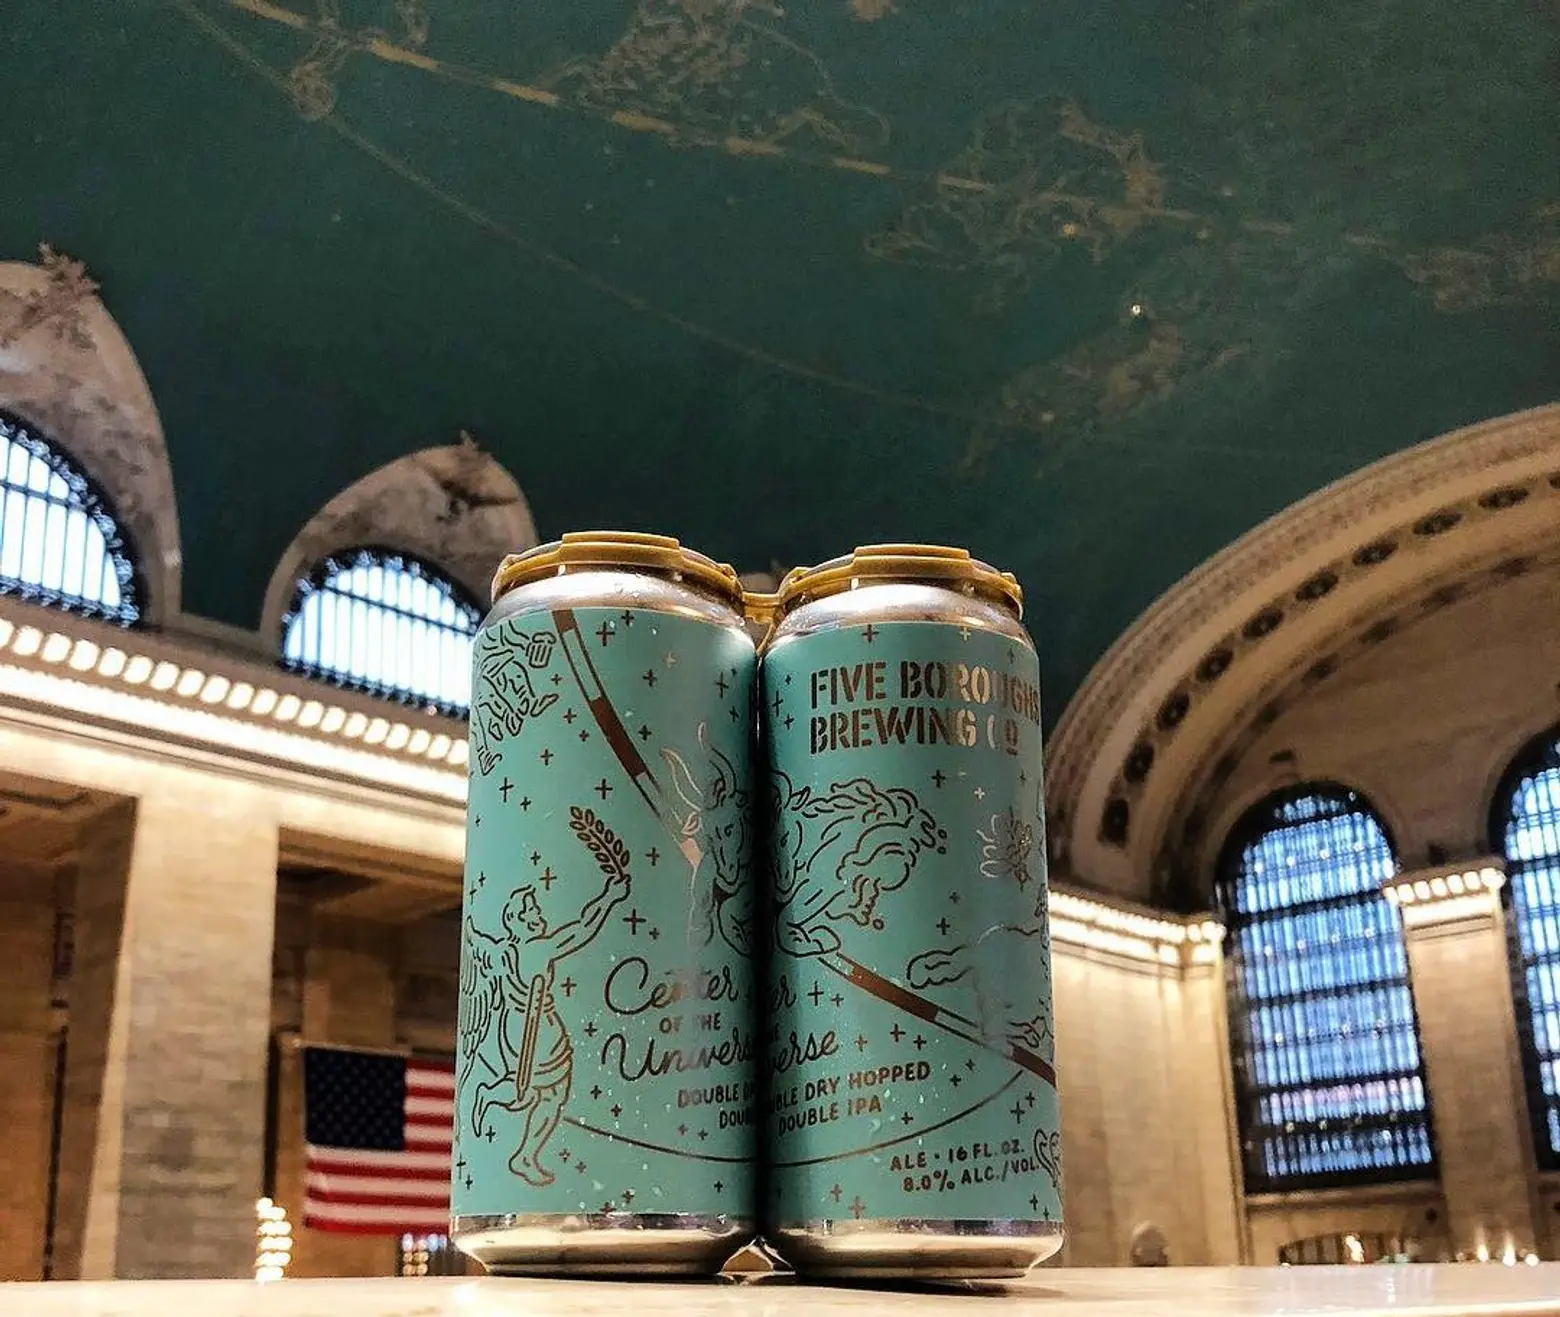 Local brewery honors Grand Central’s constellation ceiling with new beer